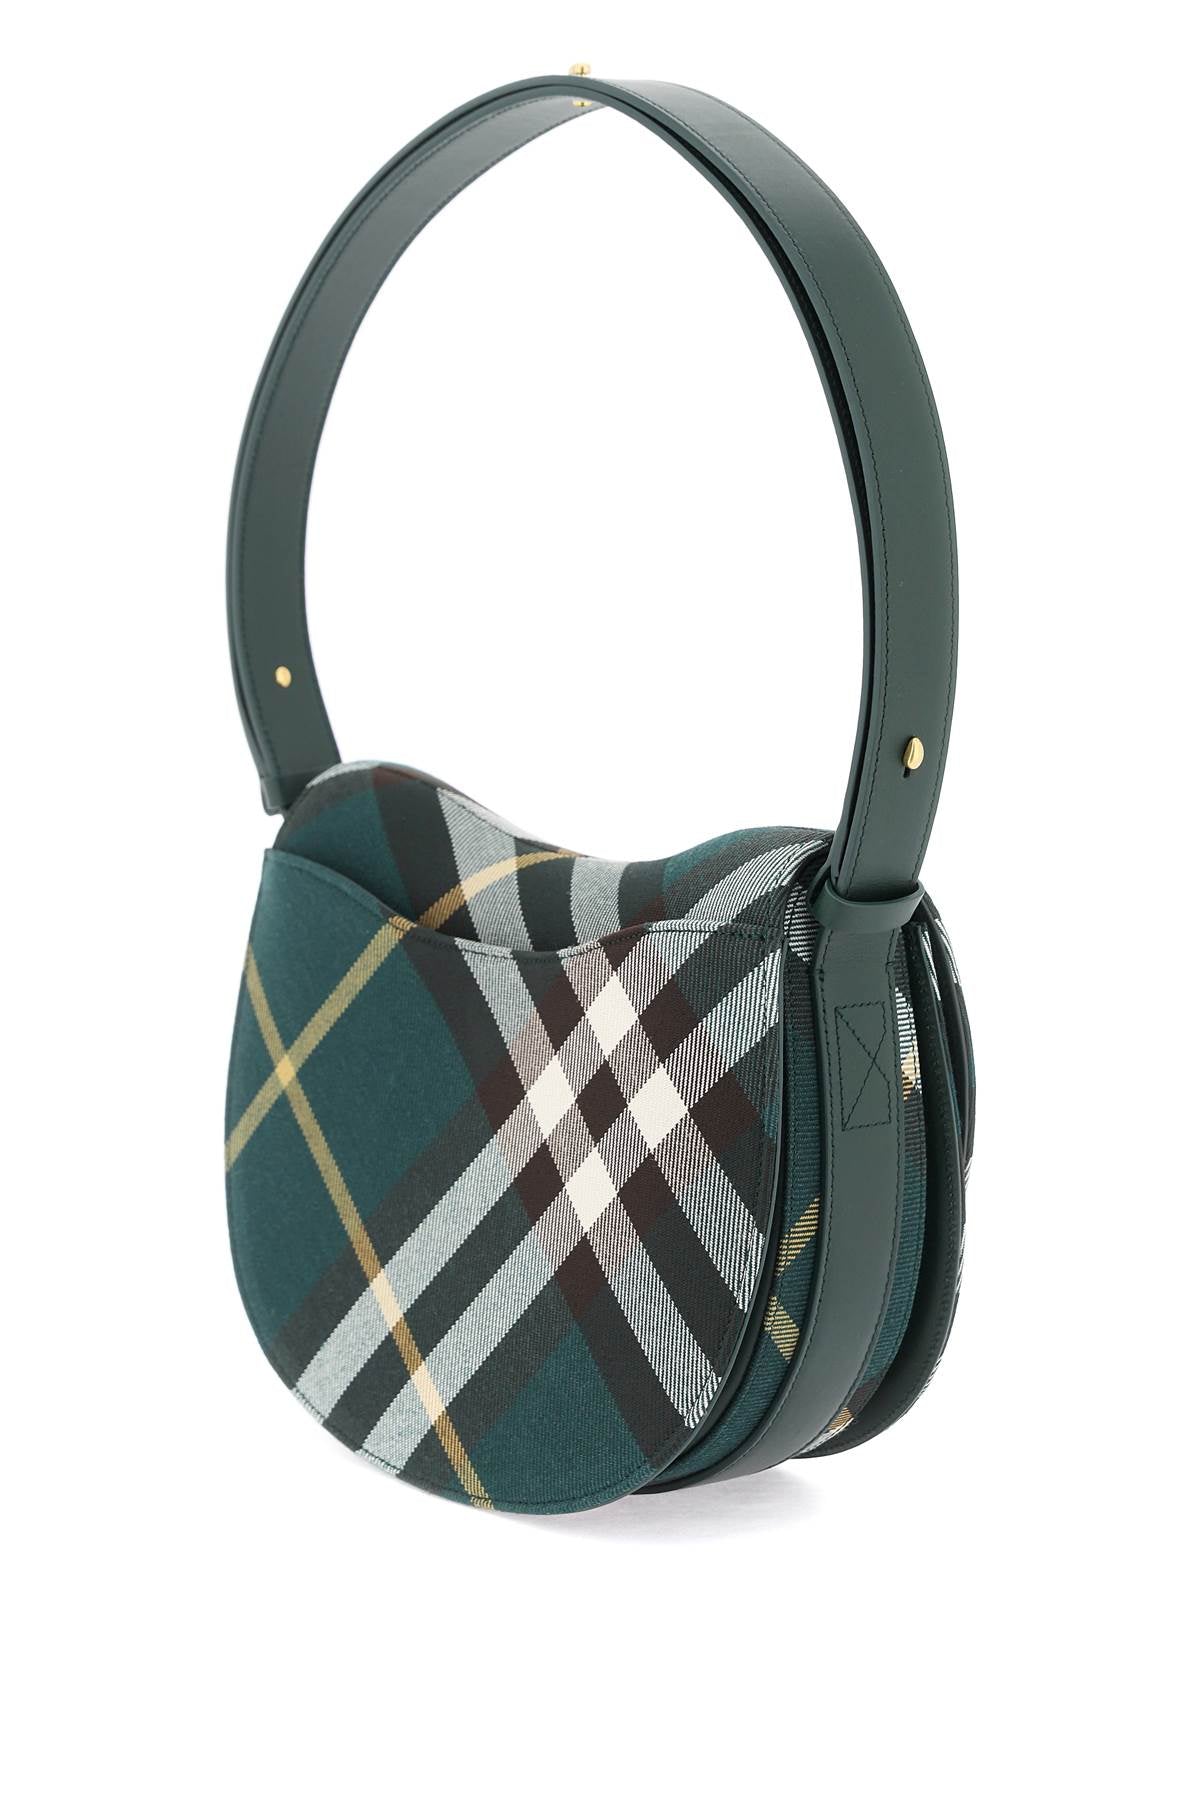 Green Rocking Horse Wool Handbag with Iconic Check Motif and Adjustable Strap